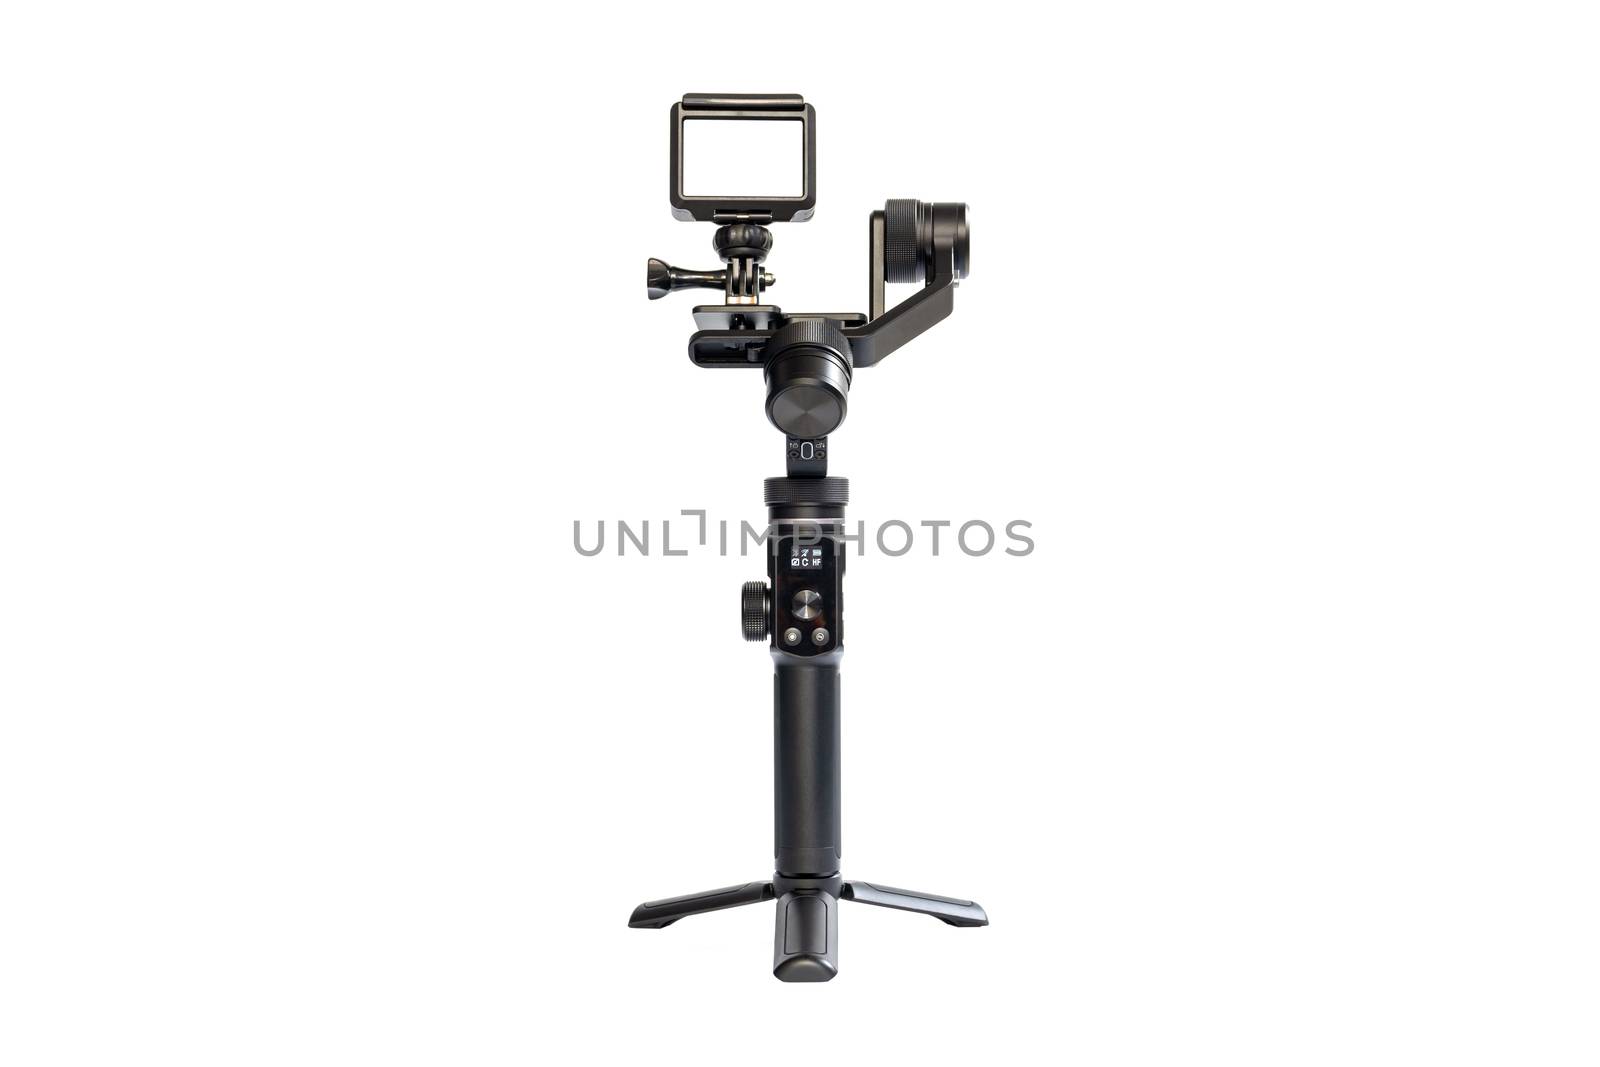 Action camera is mounted on a 3-axis motor stabilizer for smooth video recording isolated on white background.